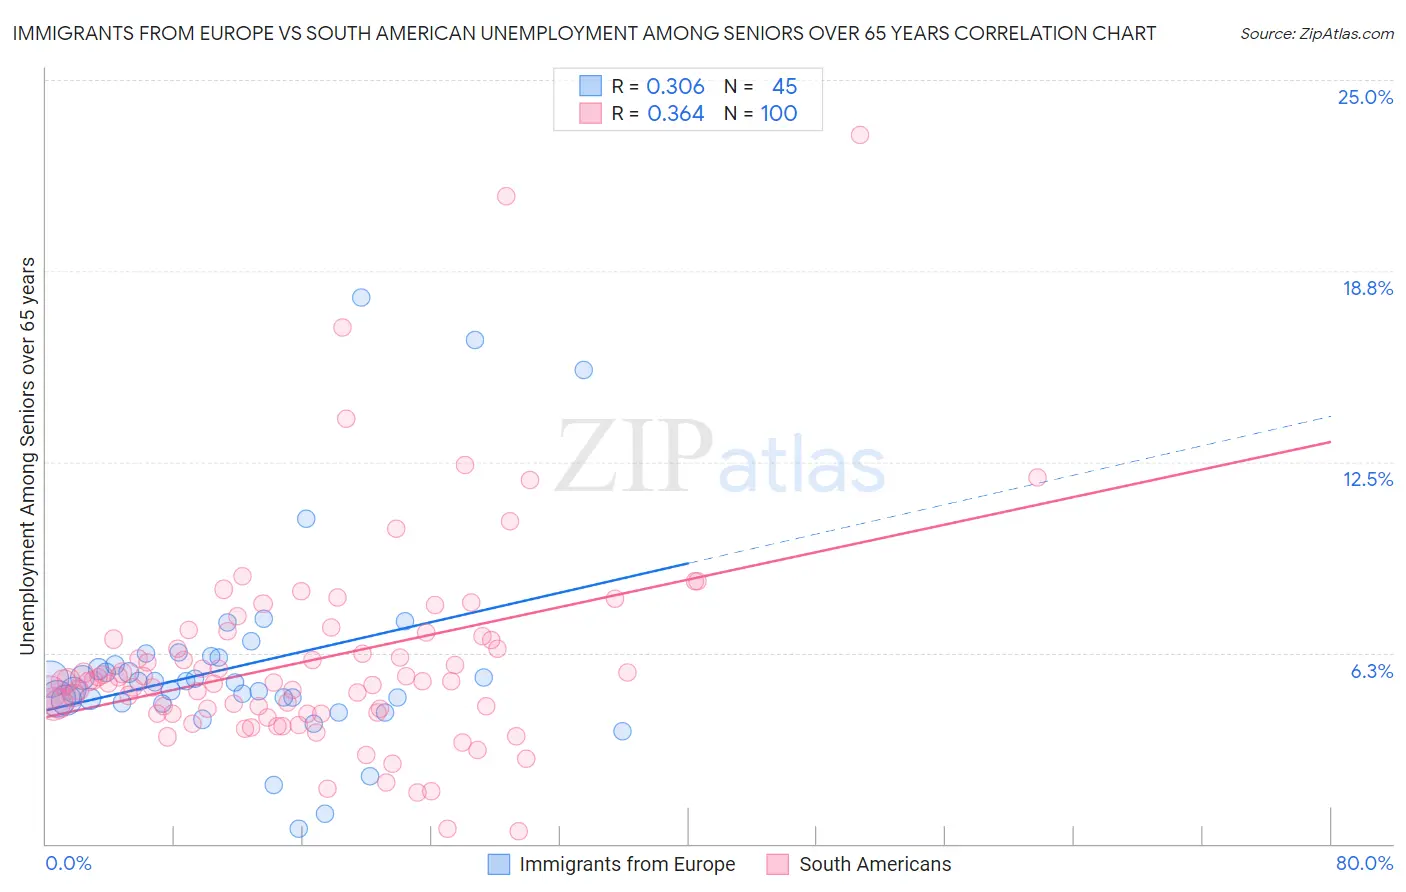 Immigrants from Europe vs South American Unemployment Among Seniors over 65 years